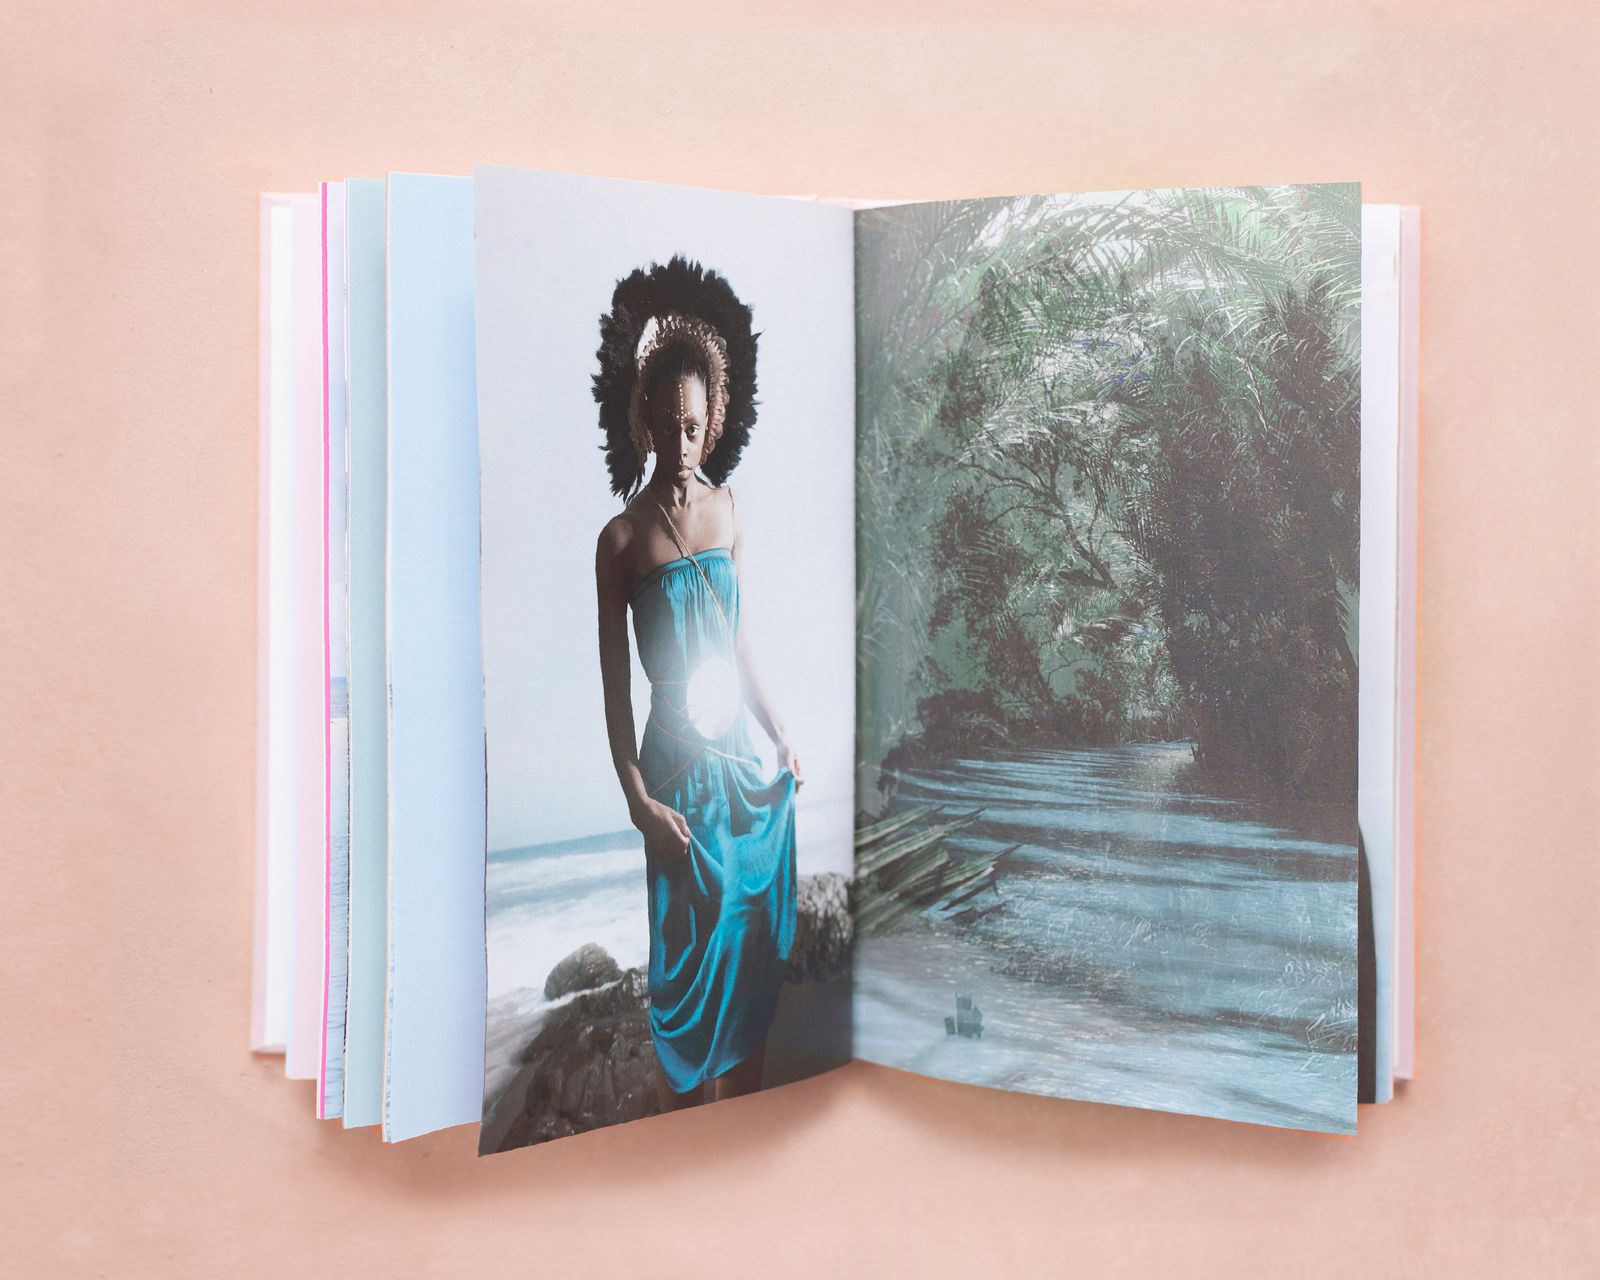 © Alice de Kruijs - Image from the Art Book Rising Waters photography project